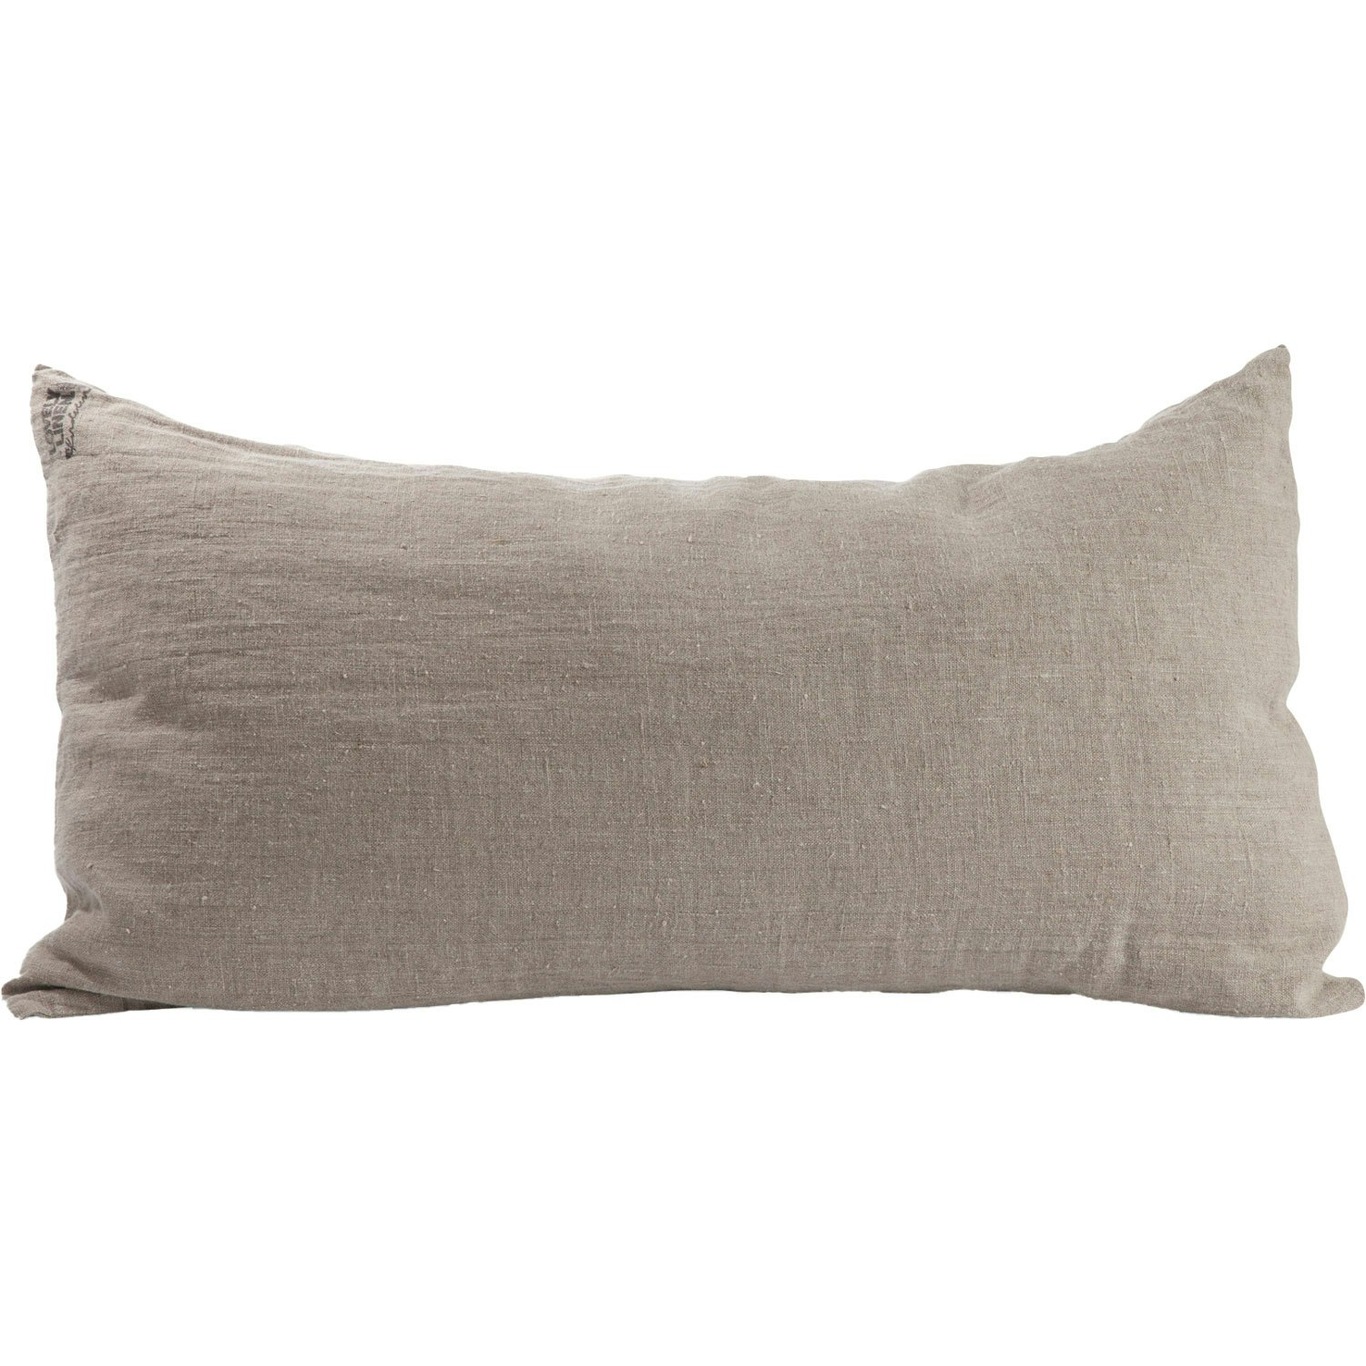 Lovely Cushion Cover 40x70 cm, Natural Beige